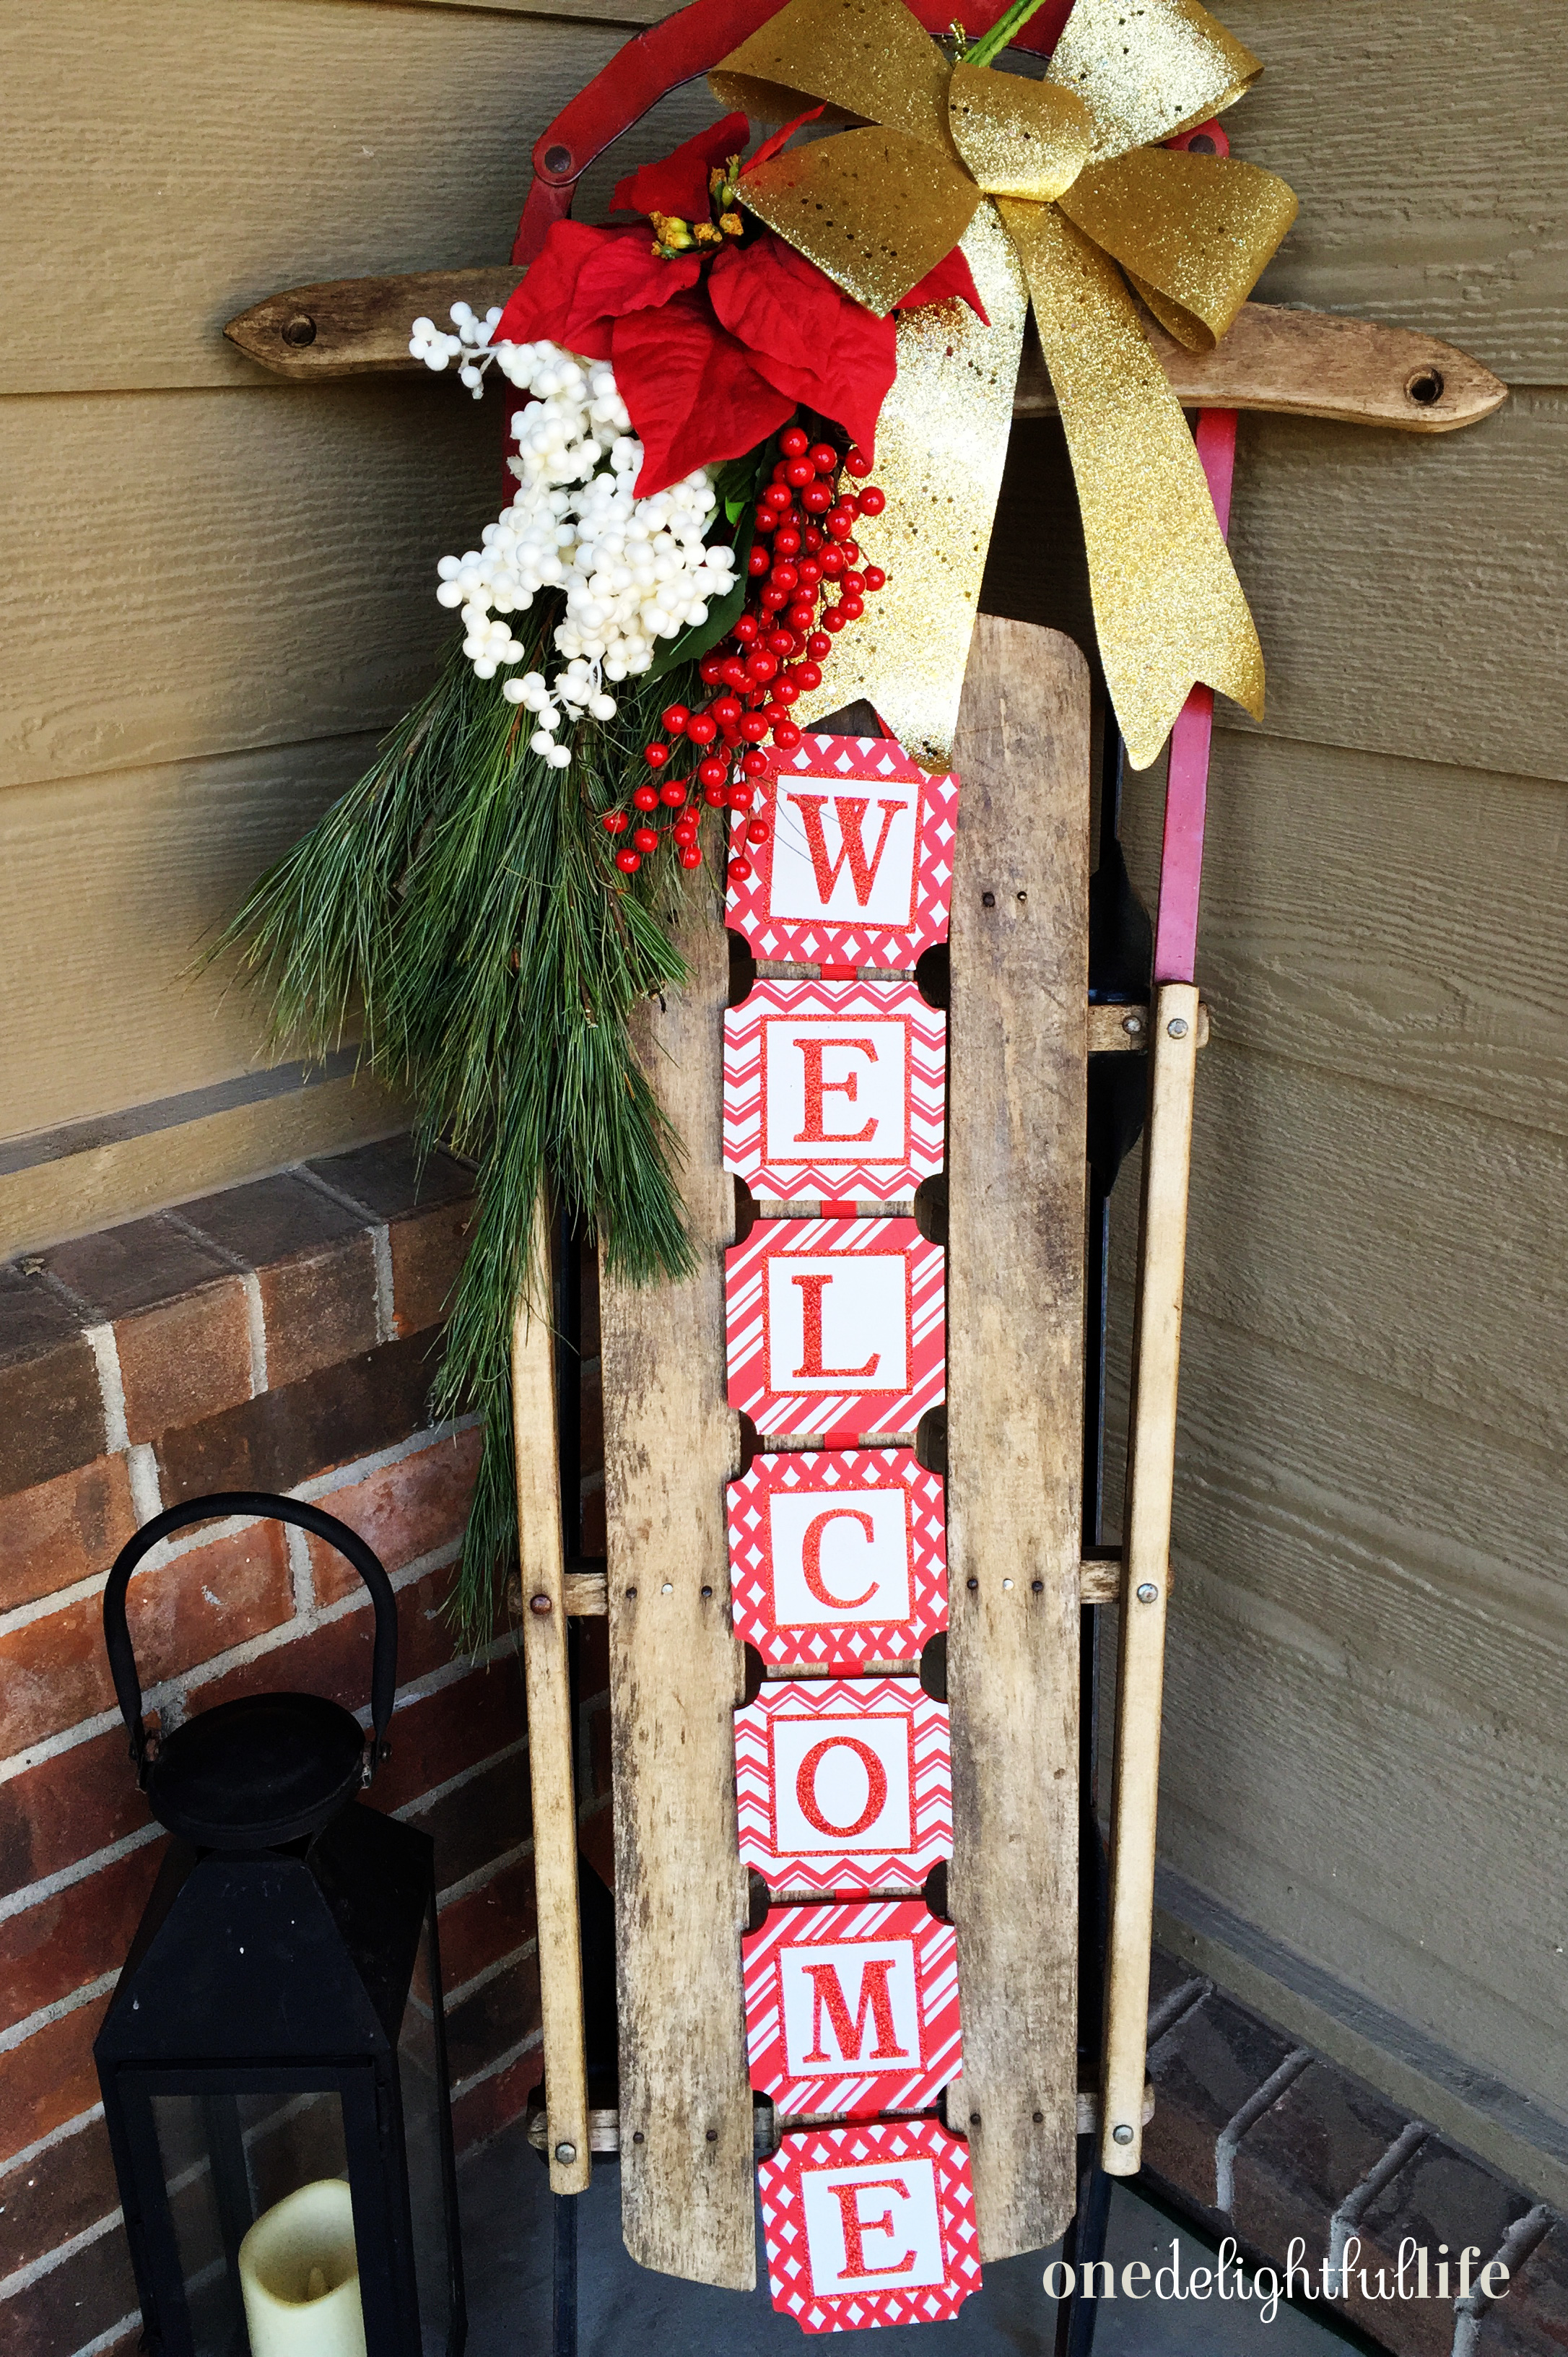 Don't forget to decorate the front porch too! This antique sled is a trending decor item for the winter season. This one was purchased 40% off during Shop Small Saturday this year.